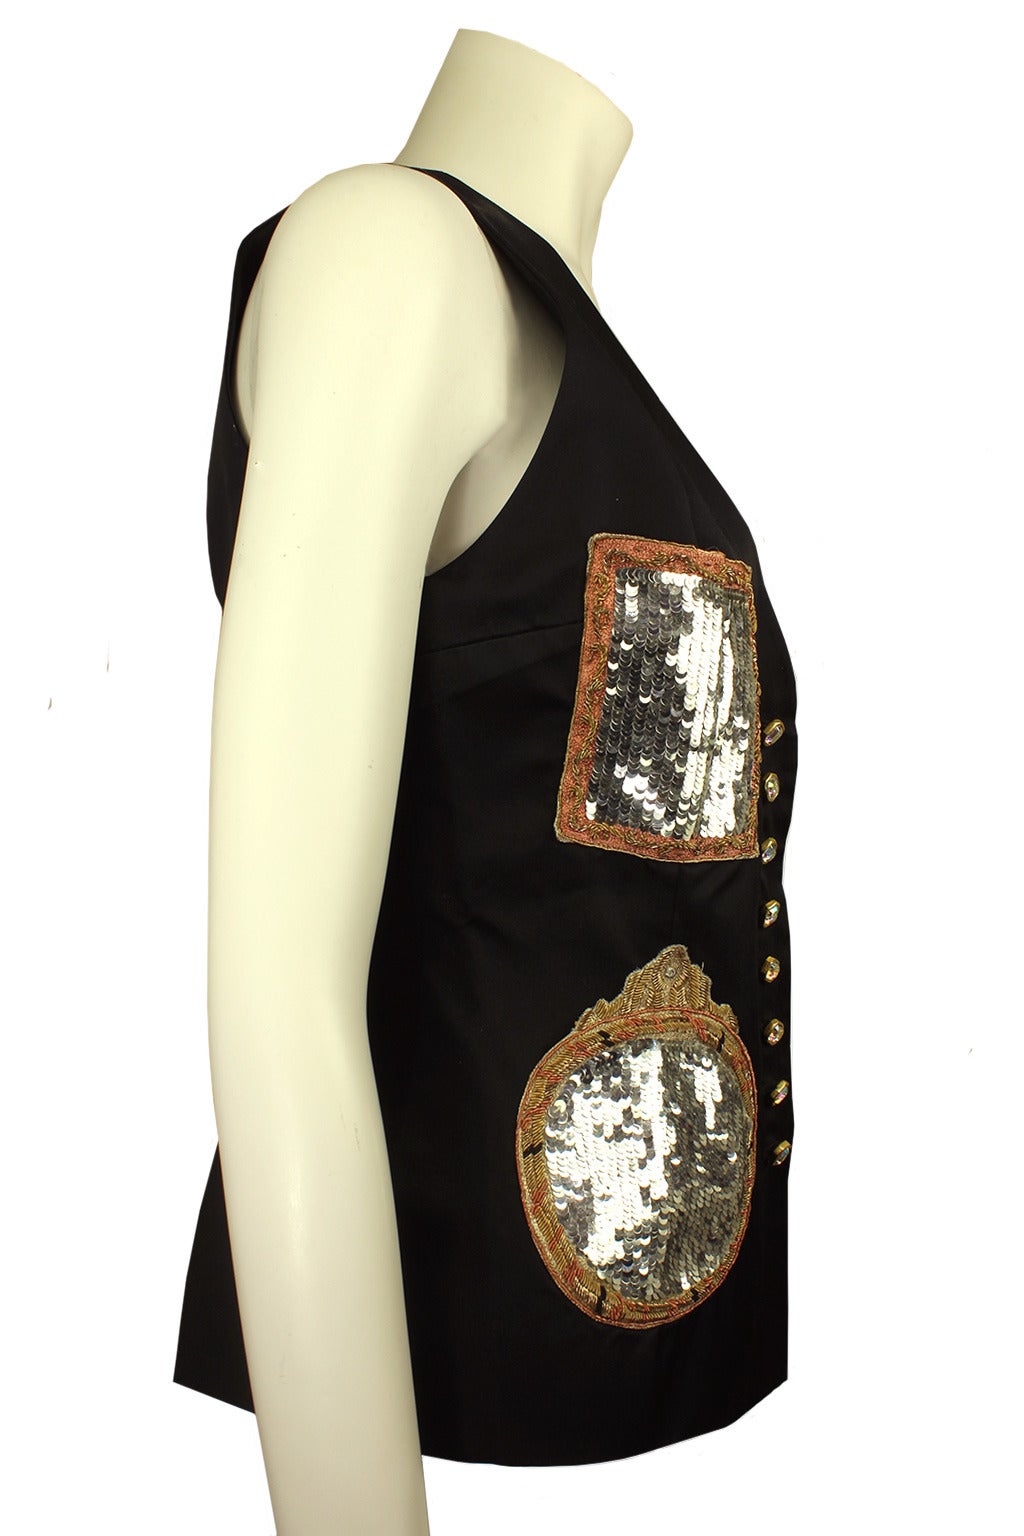 Todd Oldham always had clever design elements to his clothing. This vest has four large patch pockets that are silver sequined within gold frames mimicking baroque mirrors. The vest is hip length and has a satin tie back to cinch in the waist.